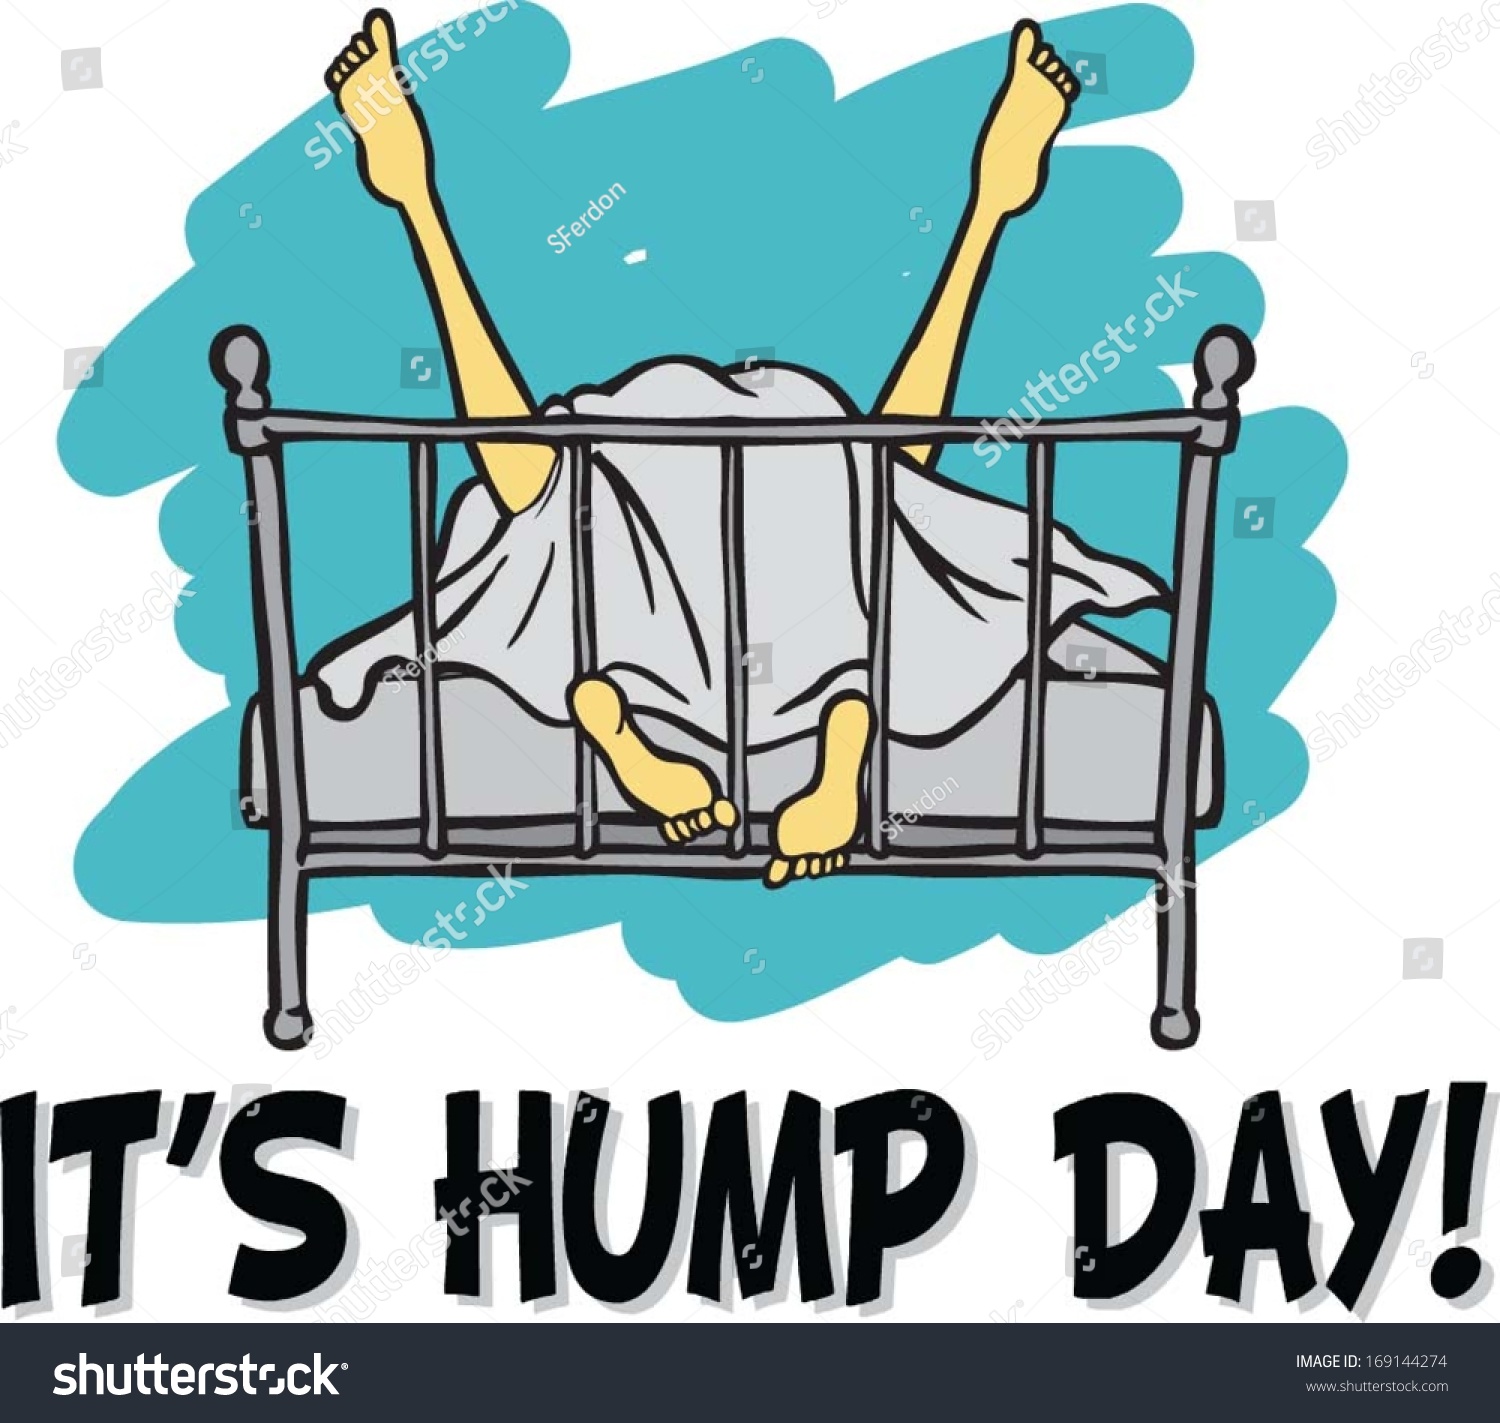 bahaa saeed recommends Happy Sexy Hump Day